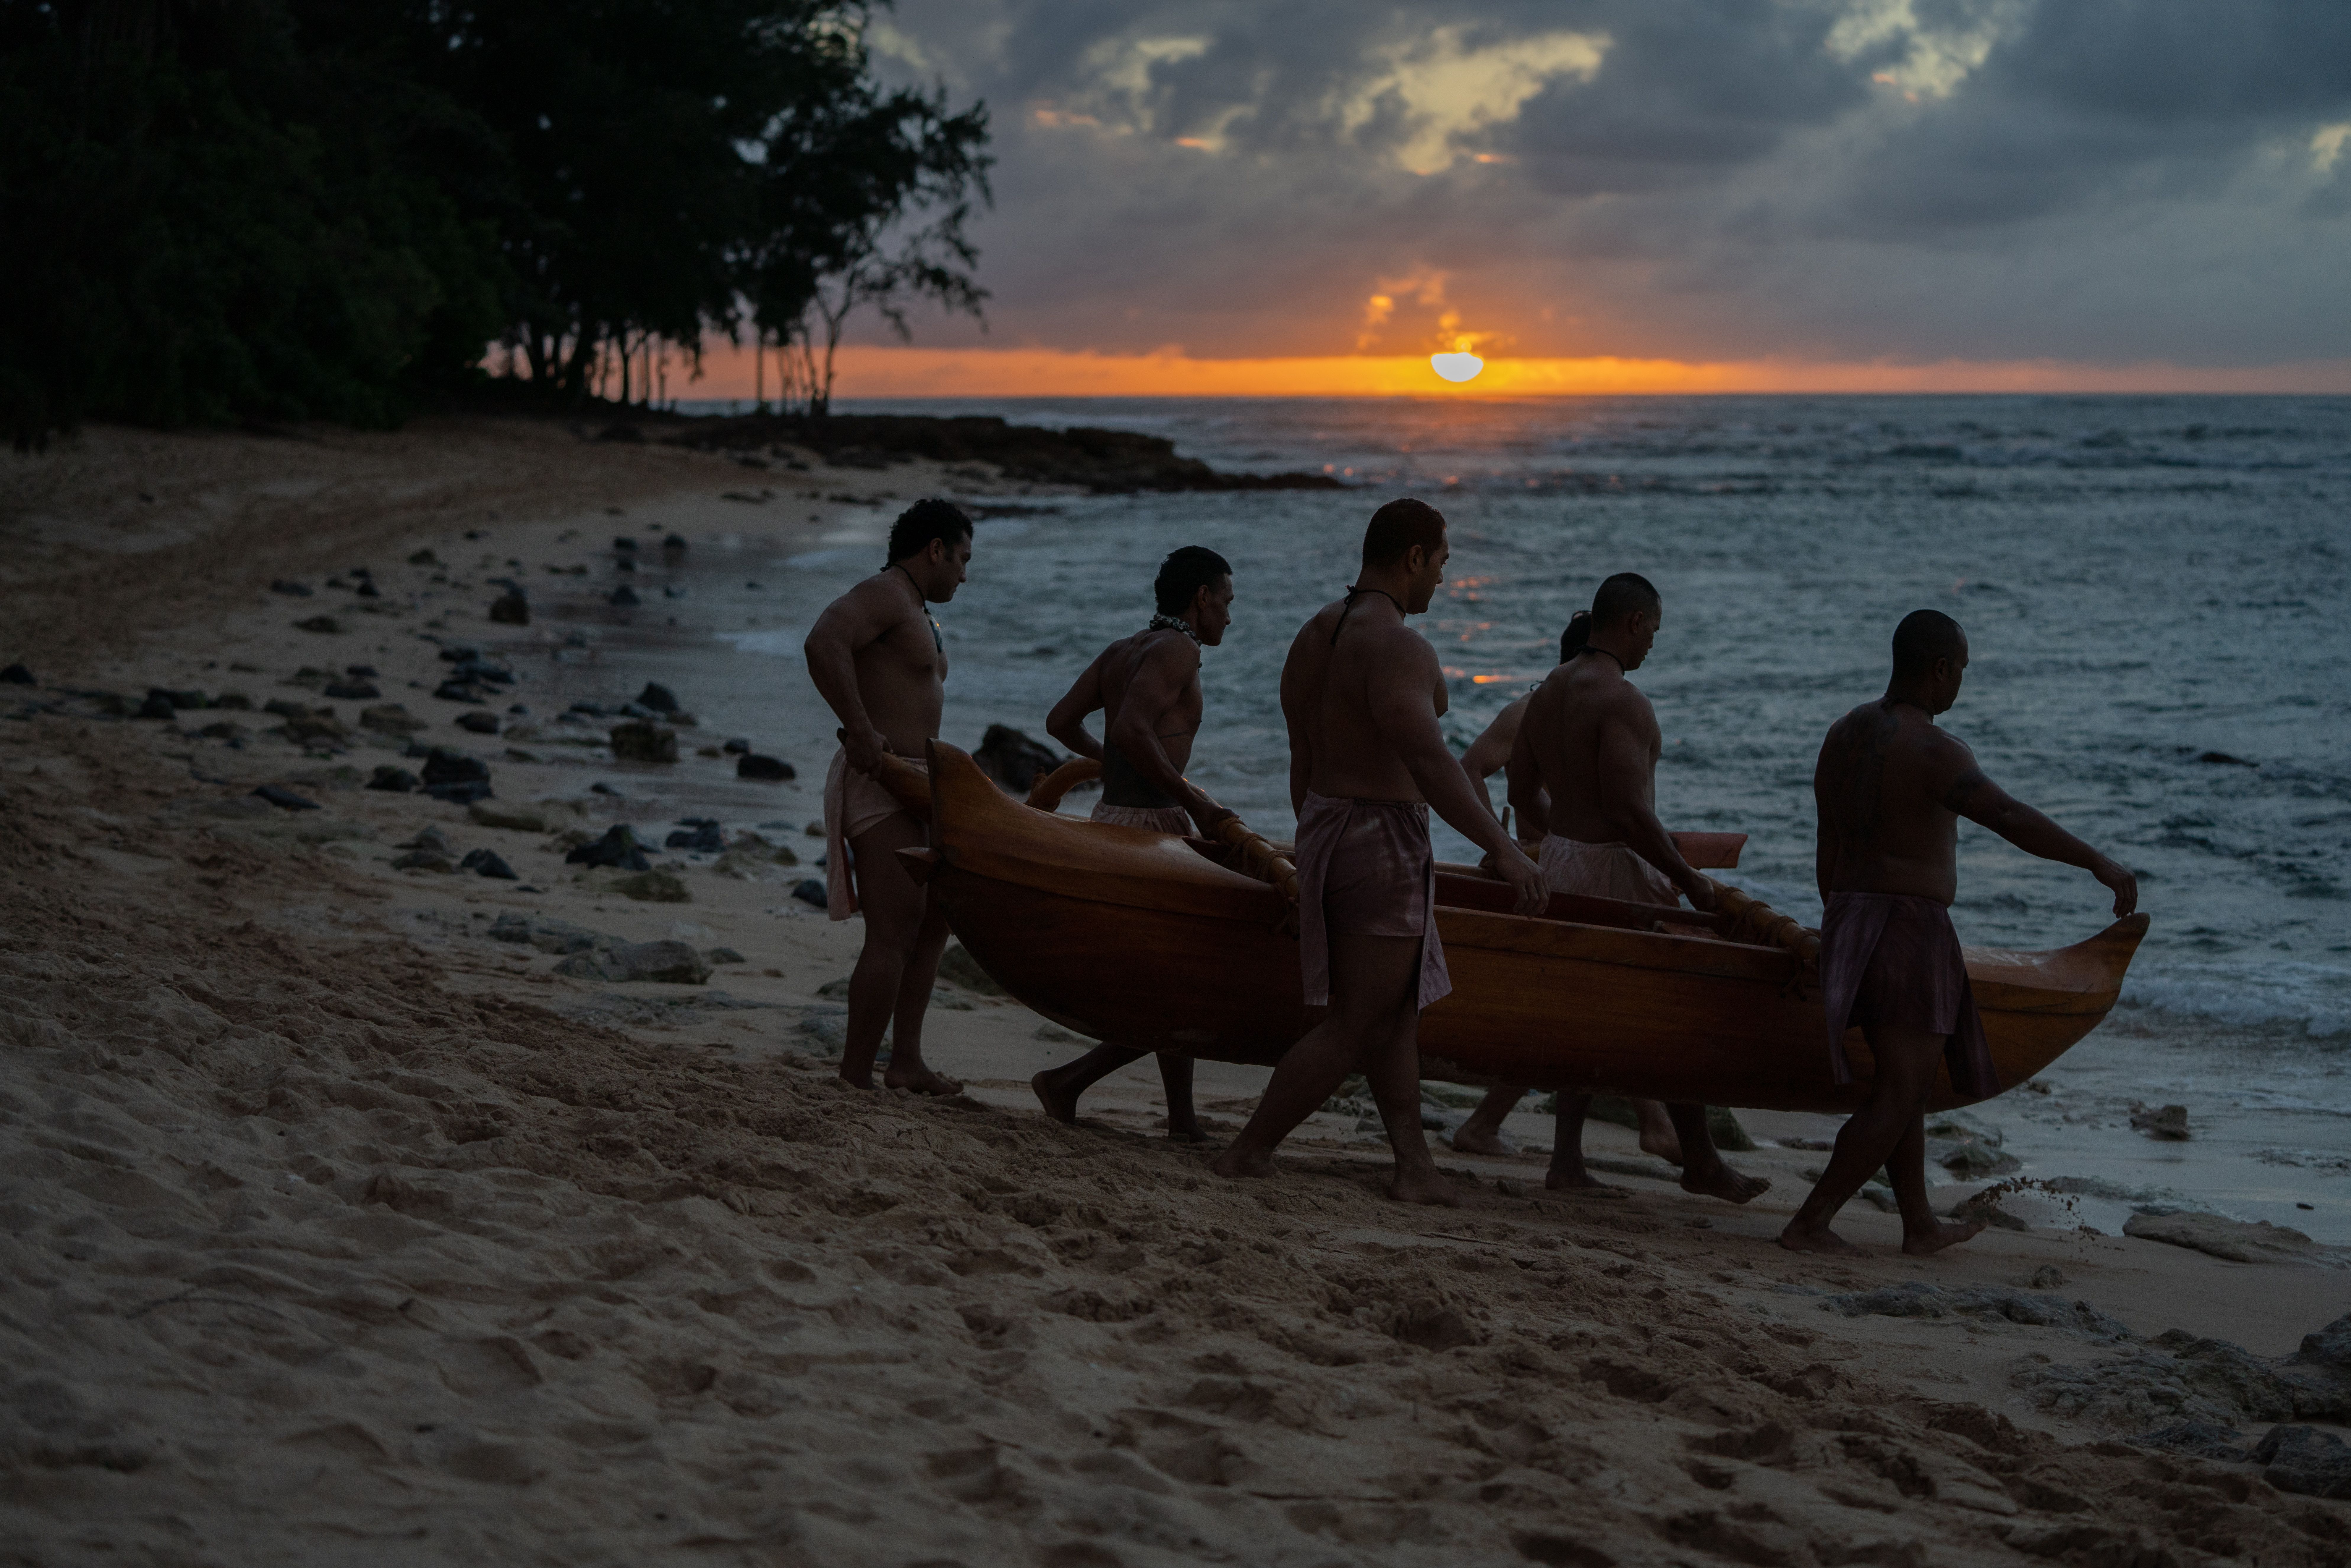 Mahalo i ka ʻāina: How to respect the culture, island, and locals while enjoying your vacation